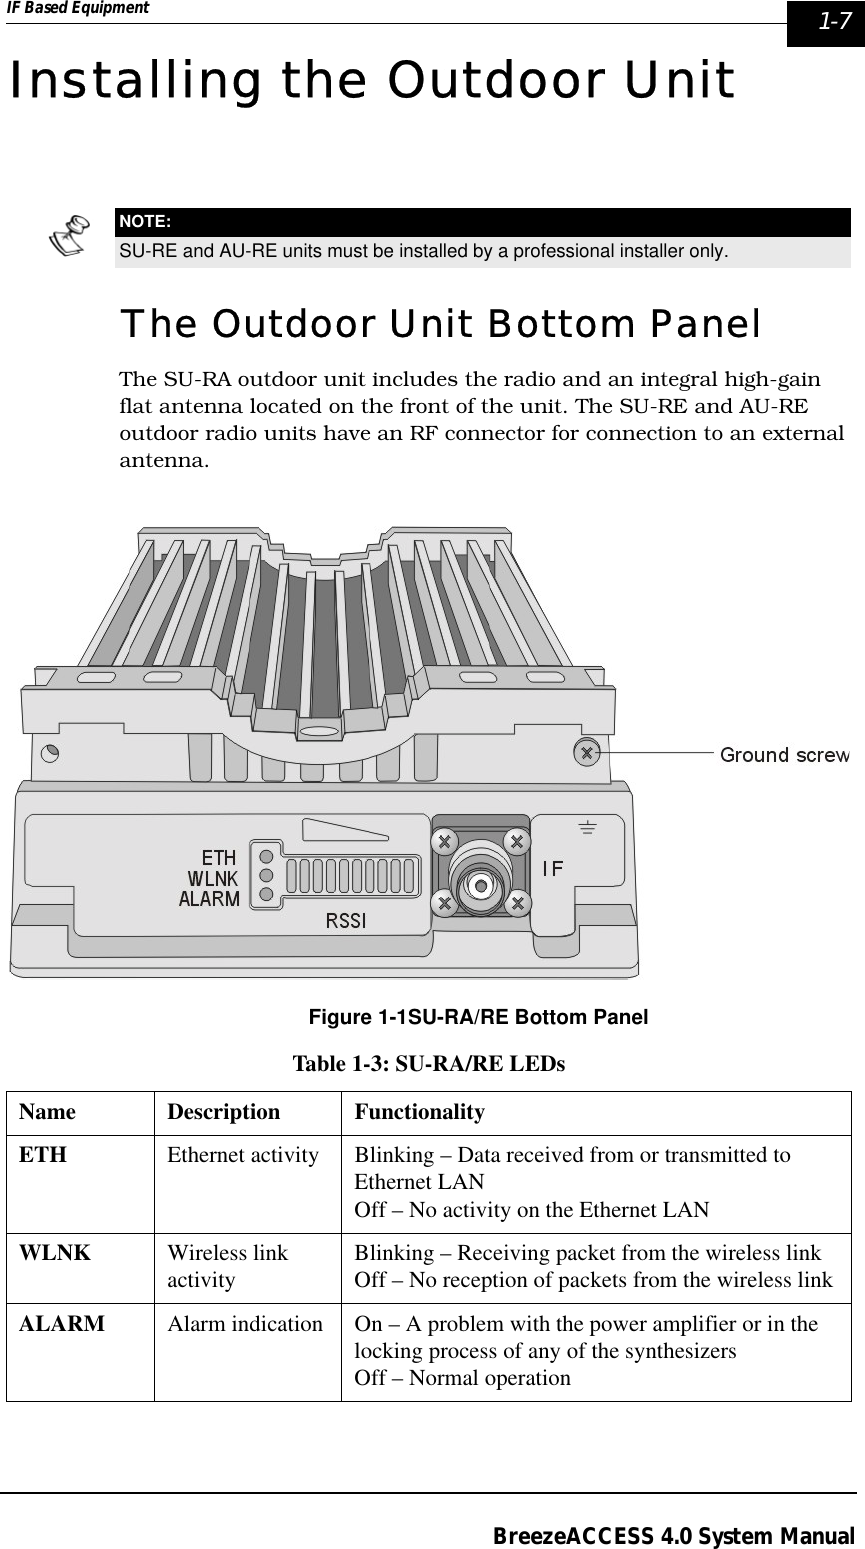 IF Based Equipment  1-7BreezeACCESS 4.0 System ManualInstalling the Outdoor Unit The Outdoor Unit Bottom Panel The SU-RA outdoor unit includes the radio and an integral high-gain flat antenna located on the front of the unit. The SU-RE and AU-RE outdoor radio units have an RF connector for connection to an external antenna.Figure 1-1SU-RA/RE Bottom PanelNOTE:SU-RE and AU-RE units must be installed by a professional installer only.Table 1-3: SU-RA/RE LEDsName Description FunctionalityETH Ethernet activity Blinking – Data received from or transmitted to Ethernet LANOff – No activity on the Ethernet LANWLNK Wireless link activity Blinking – Receiving packet from the wireless linkOff – No reception of packets from the wireless linkALARM Alarm indication On – A problem with the power amplifier or in the locking process of any of the synthesizersOff – Normal operation